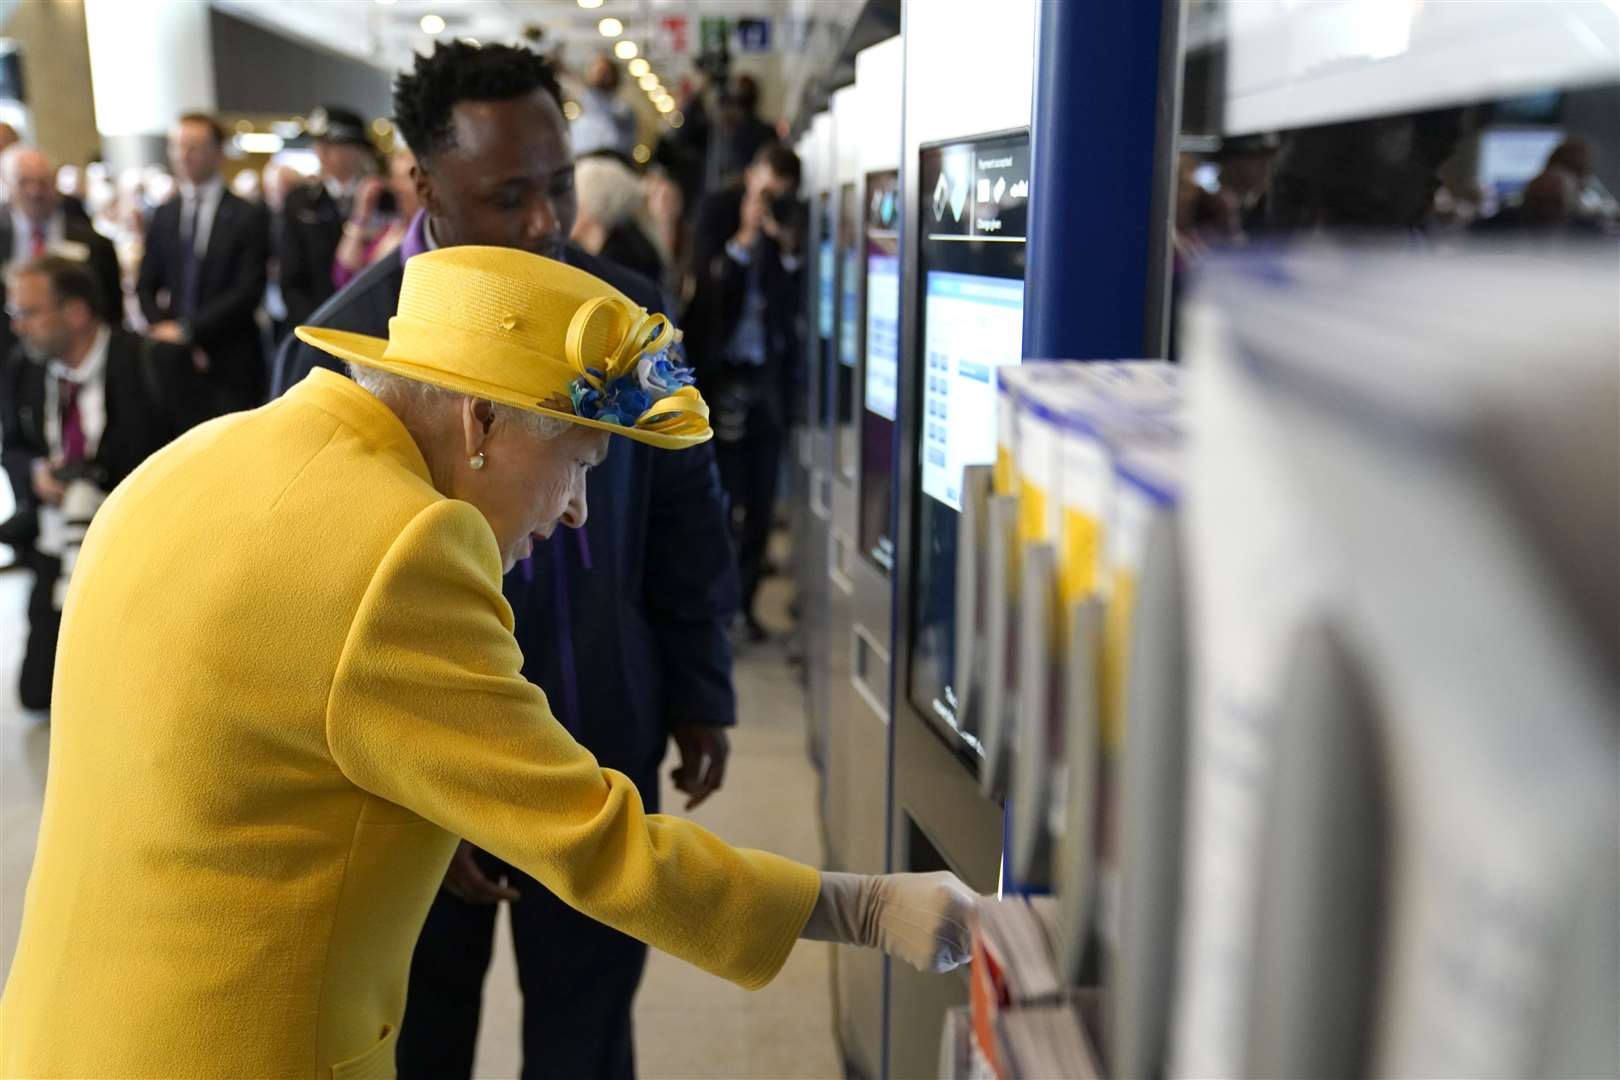 The Queen using an oyster card machine at Paddington station (Andrew Matthews/PA)